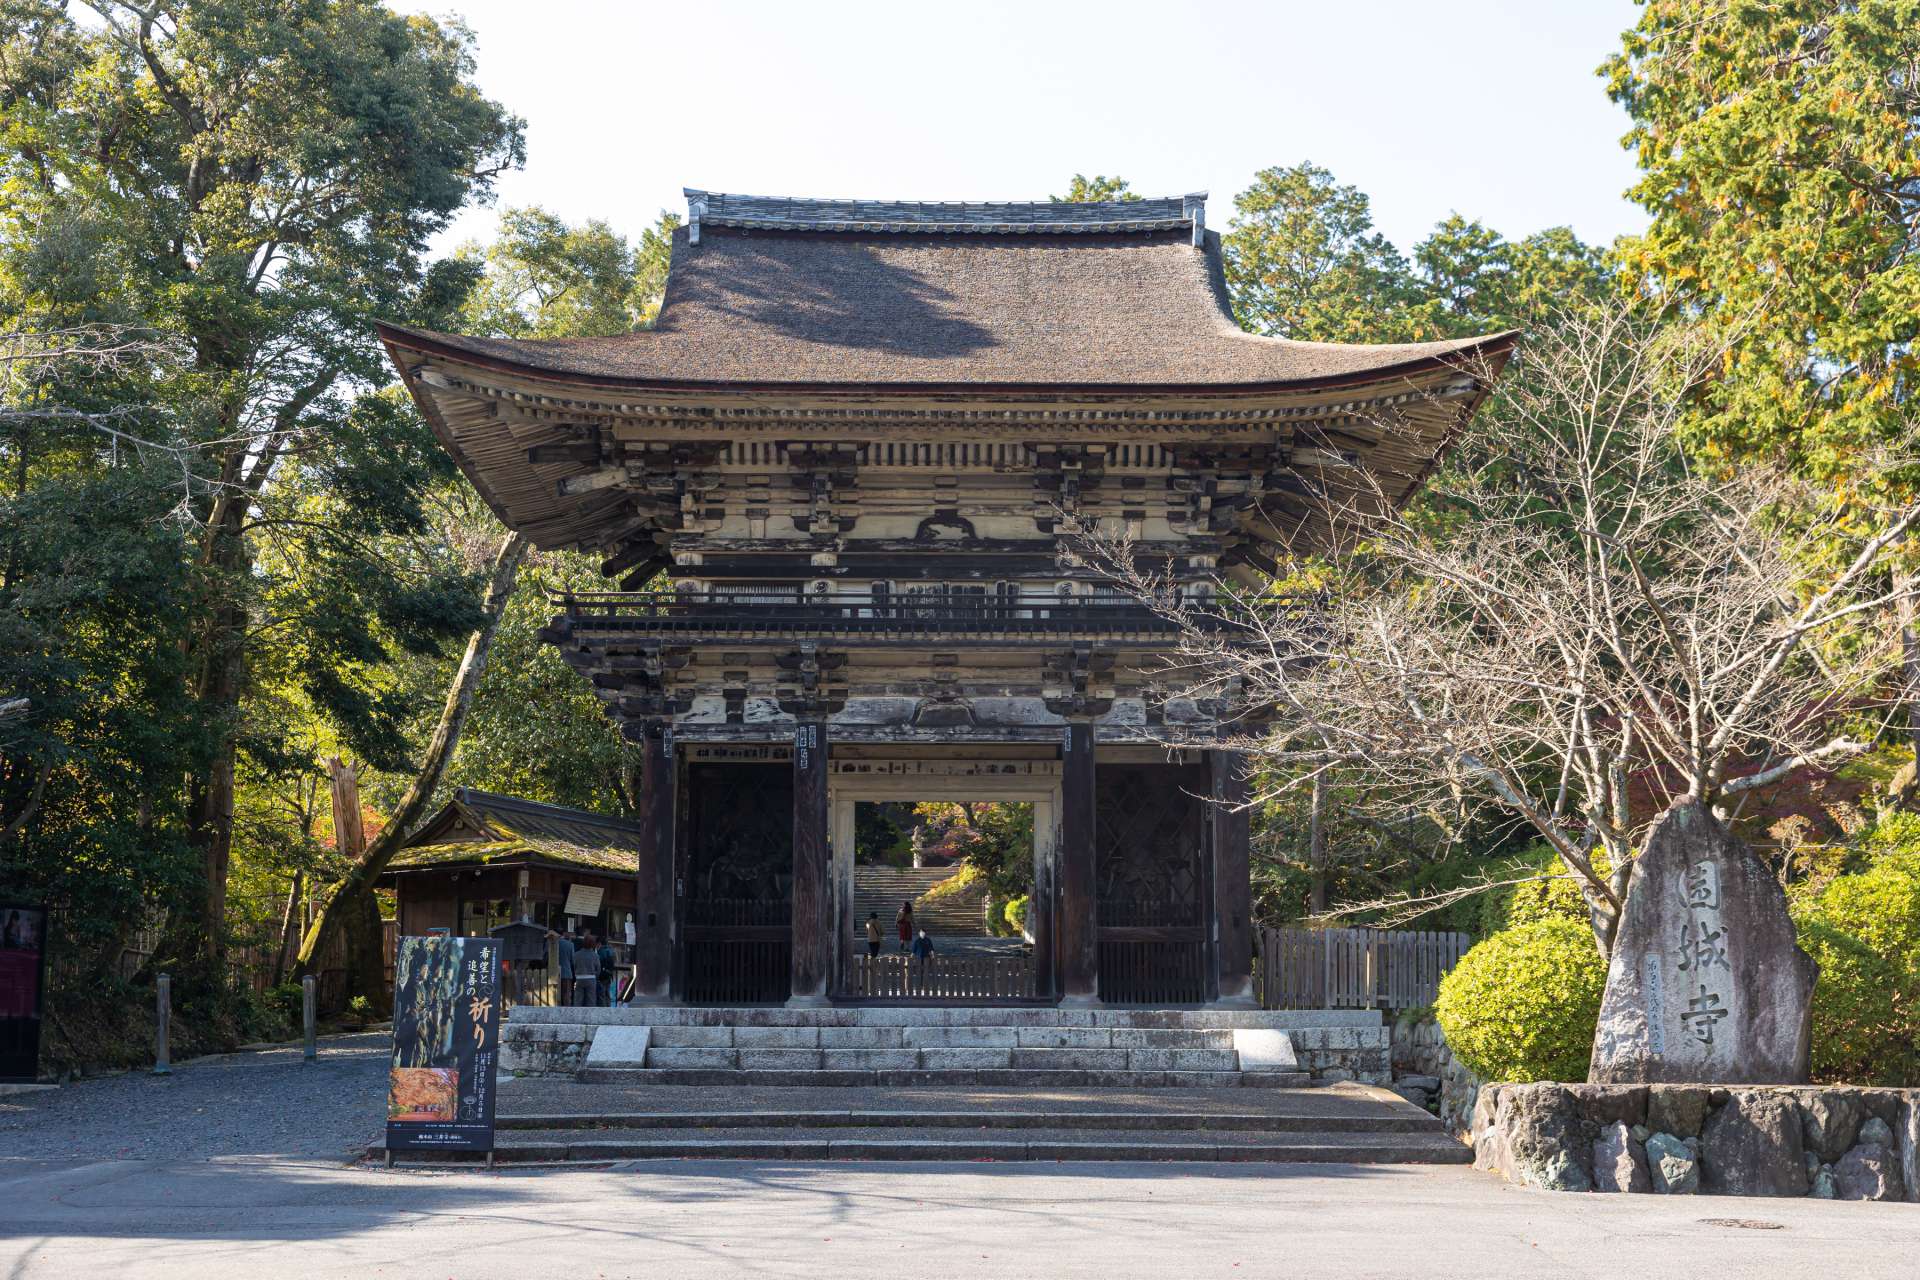 Daimon, the main entrance to Mii-dera Temple. Two nio statues stand on either side of the gate to protect the temple.